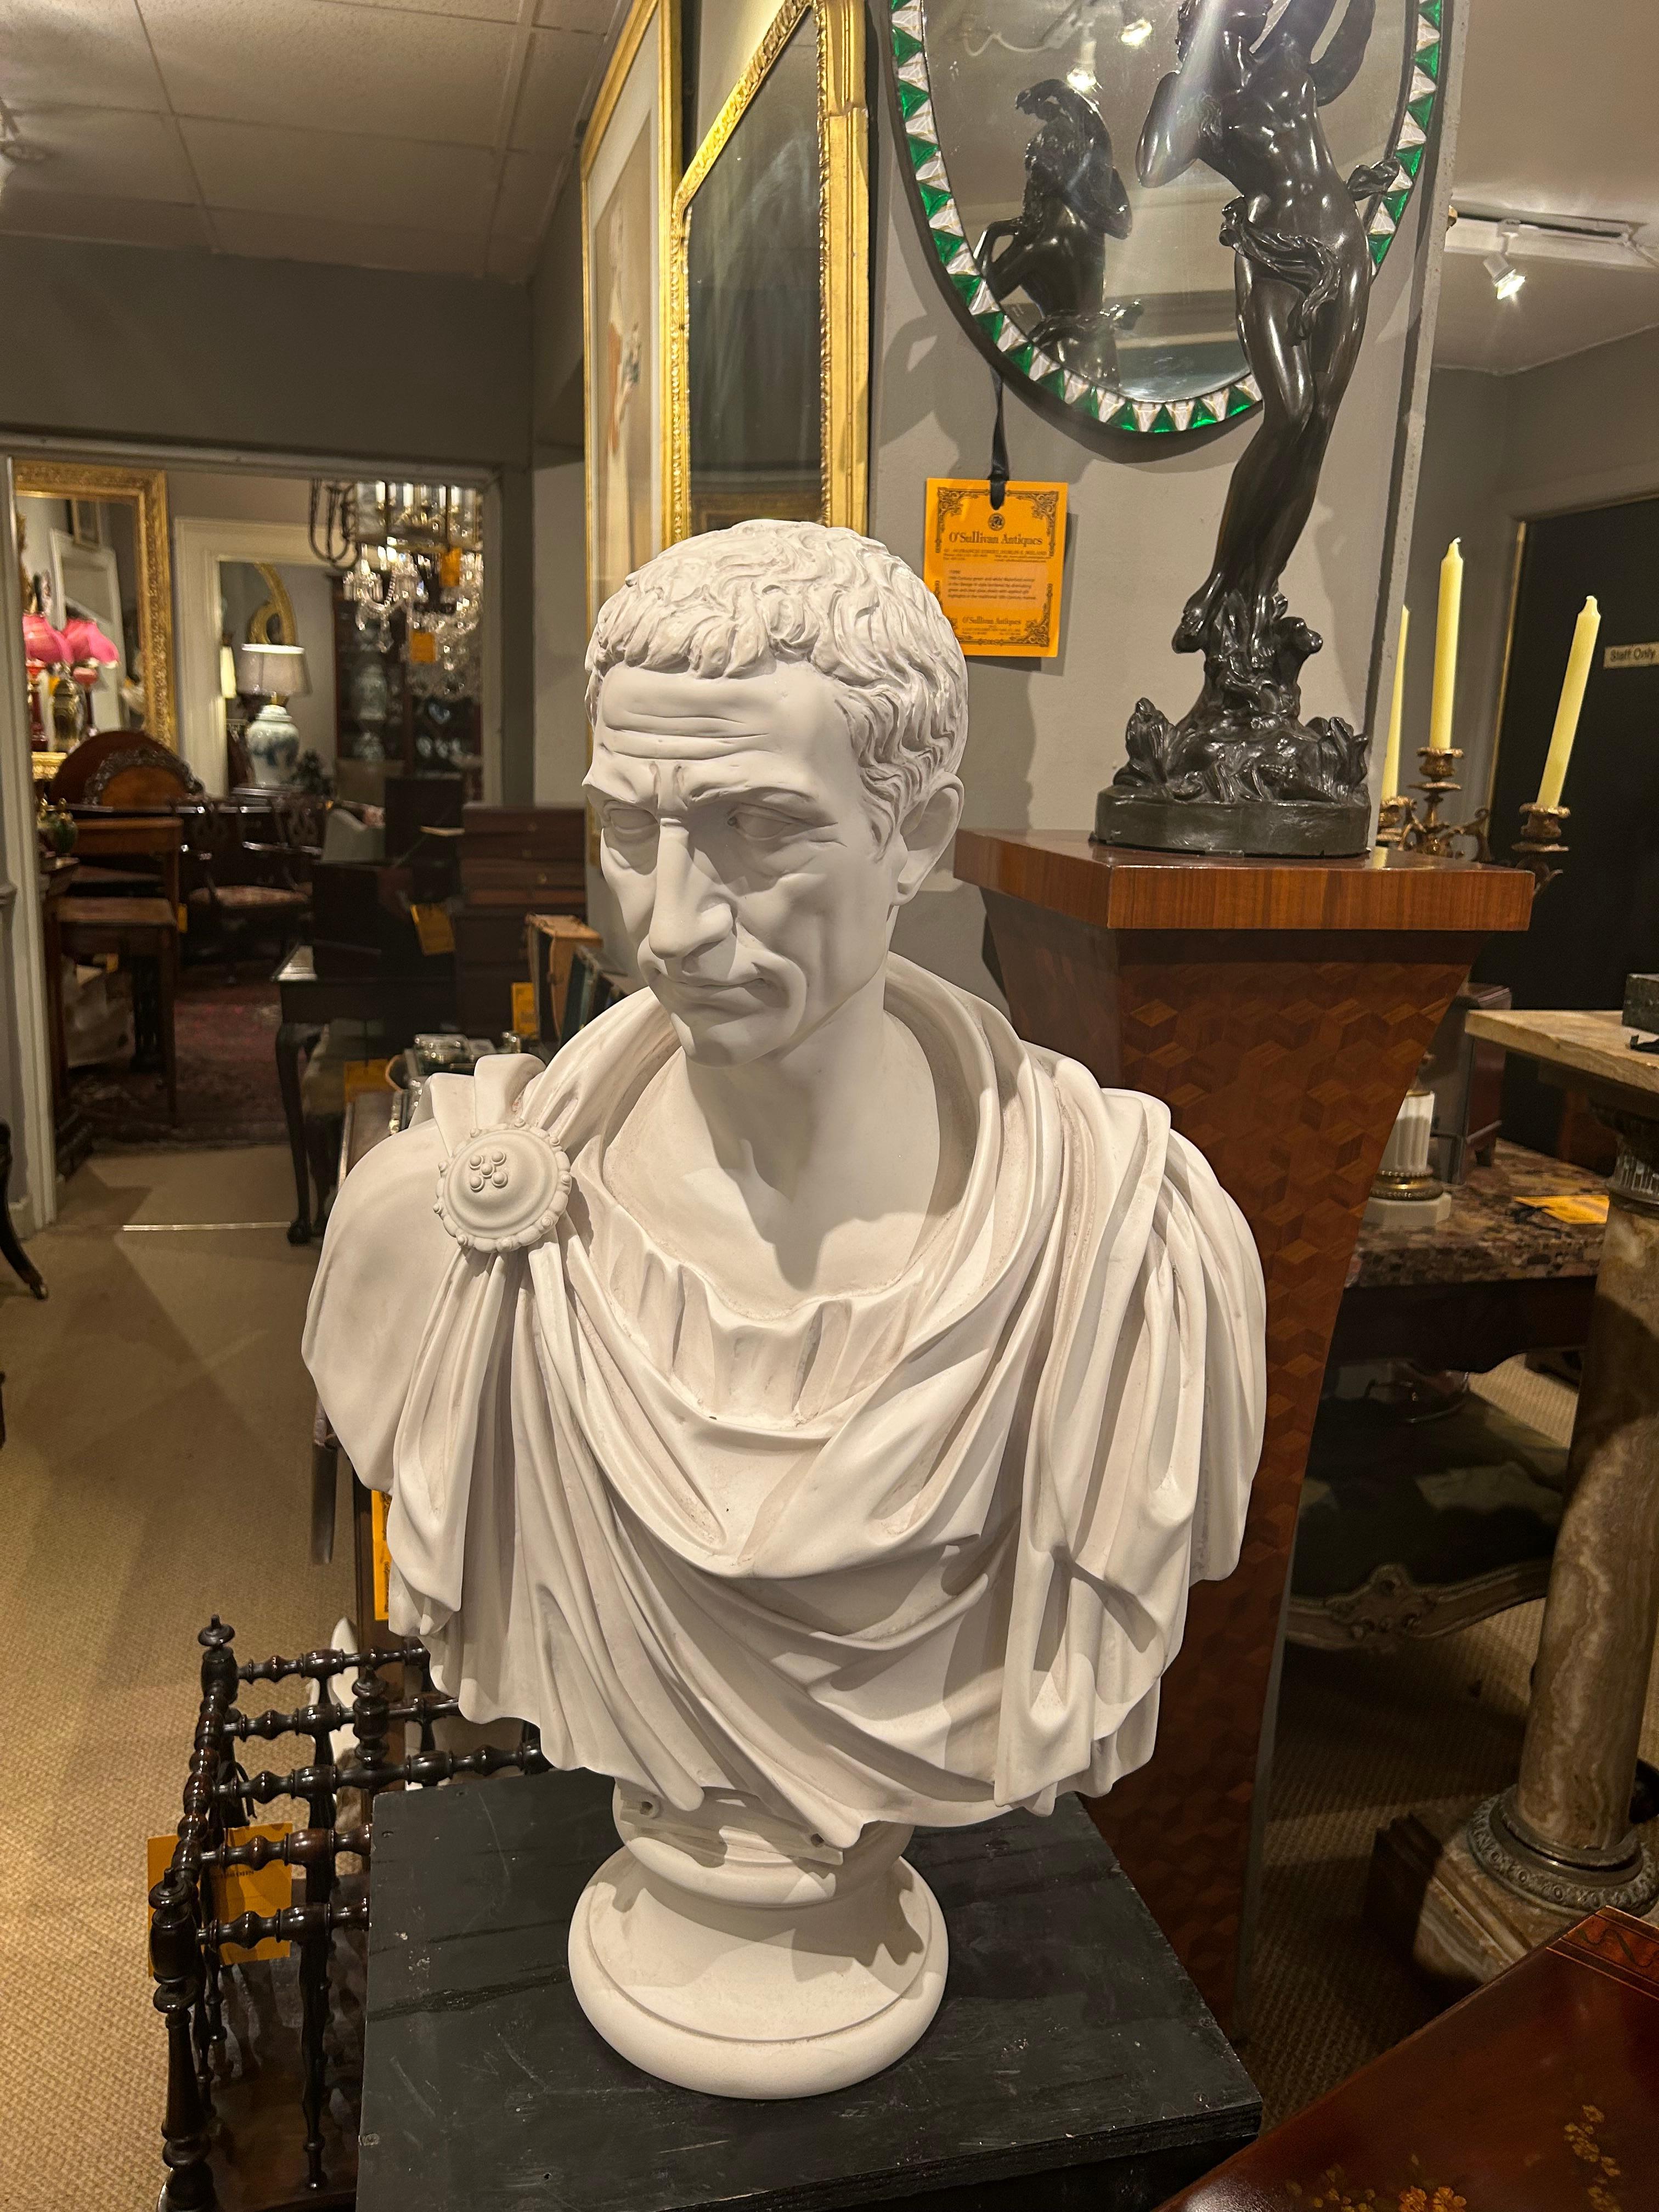 19th Century Parian Ware Bust of Julius Caesar In Excellent Condition For Sale In Dublin 8, IE